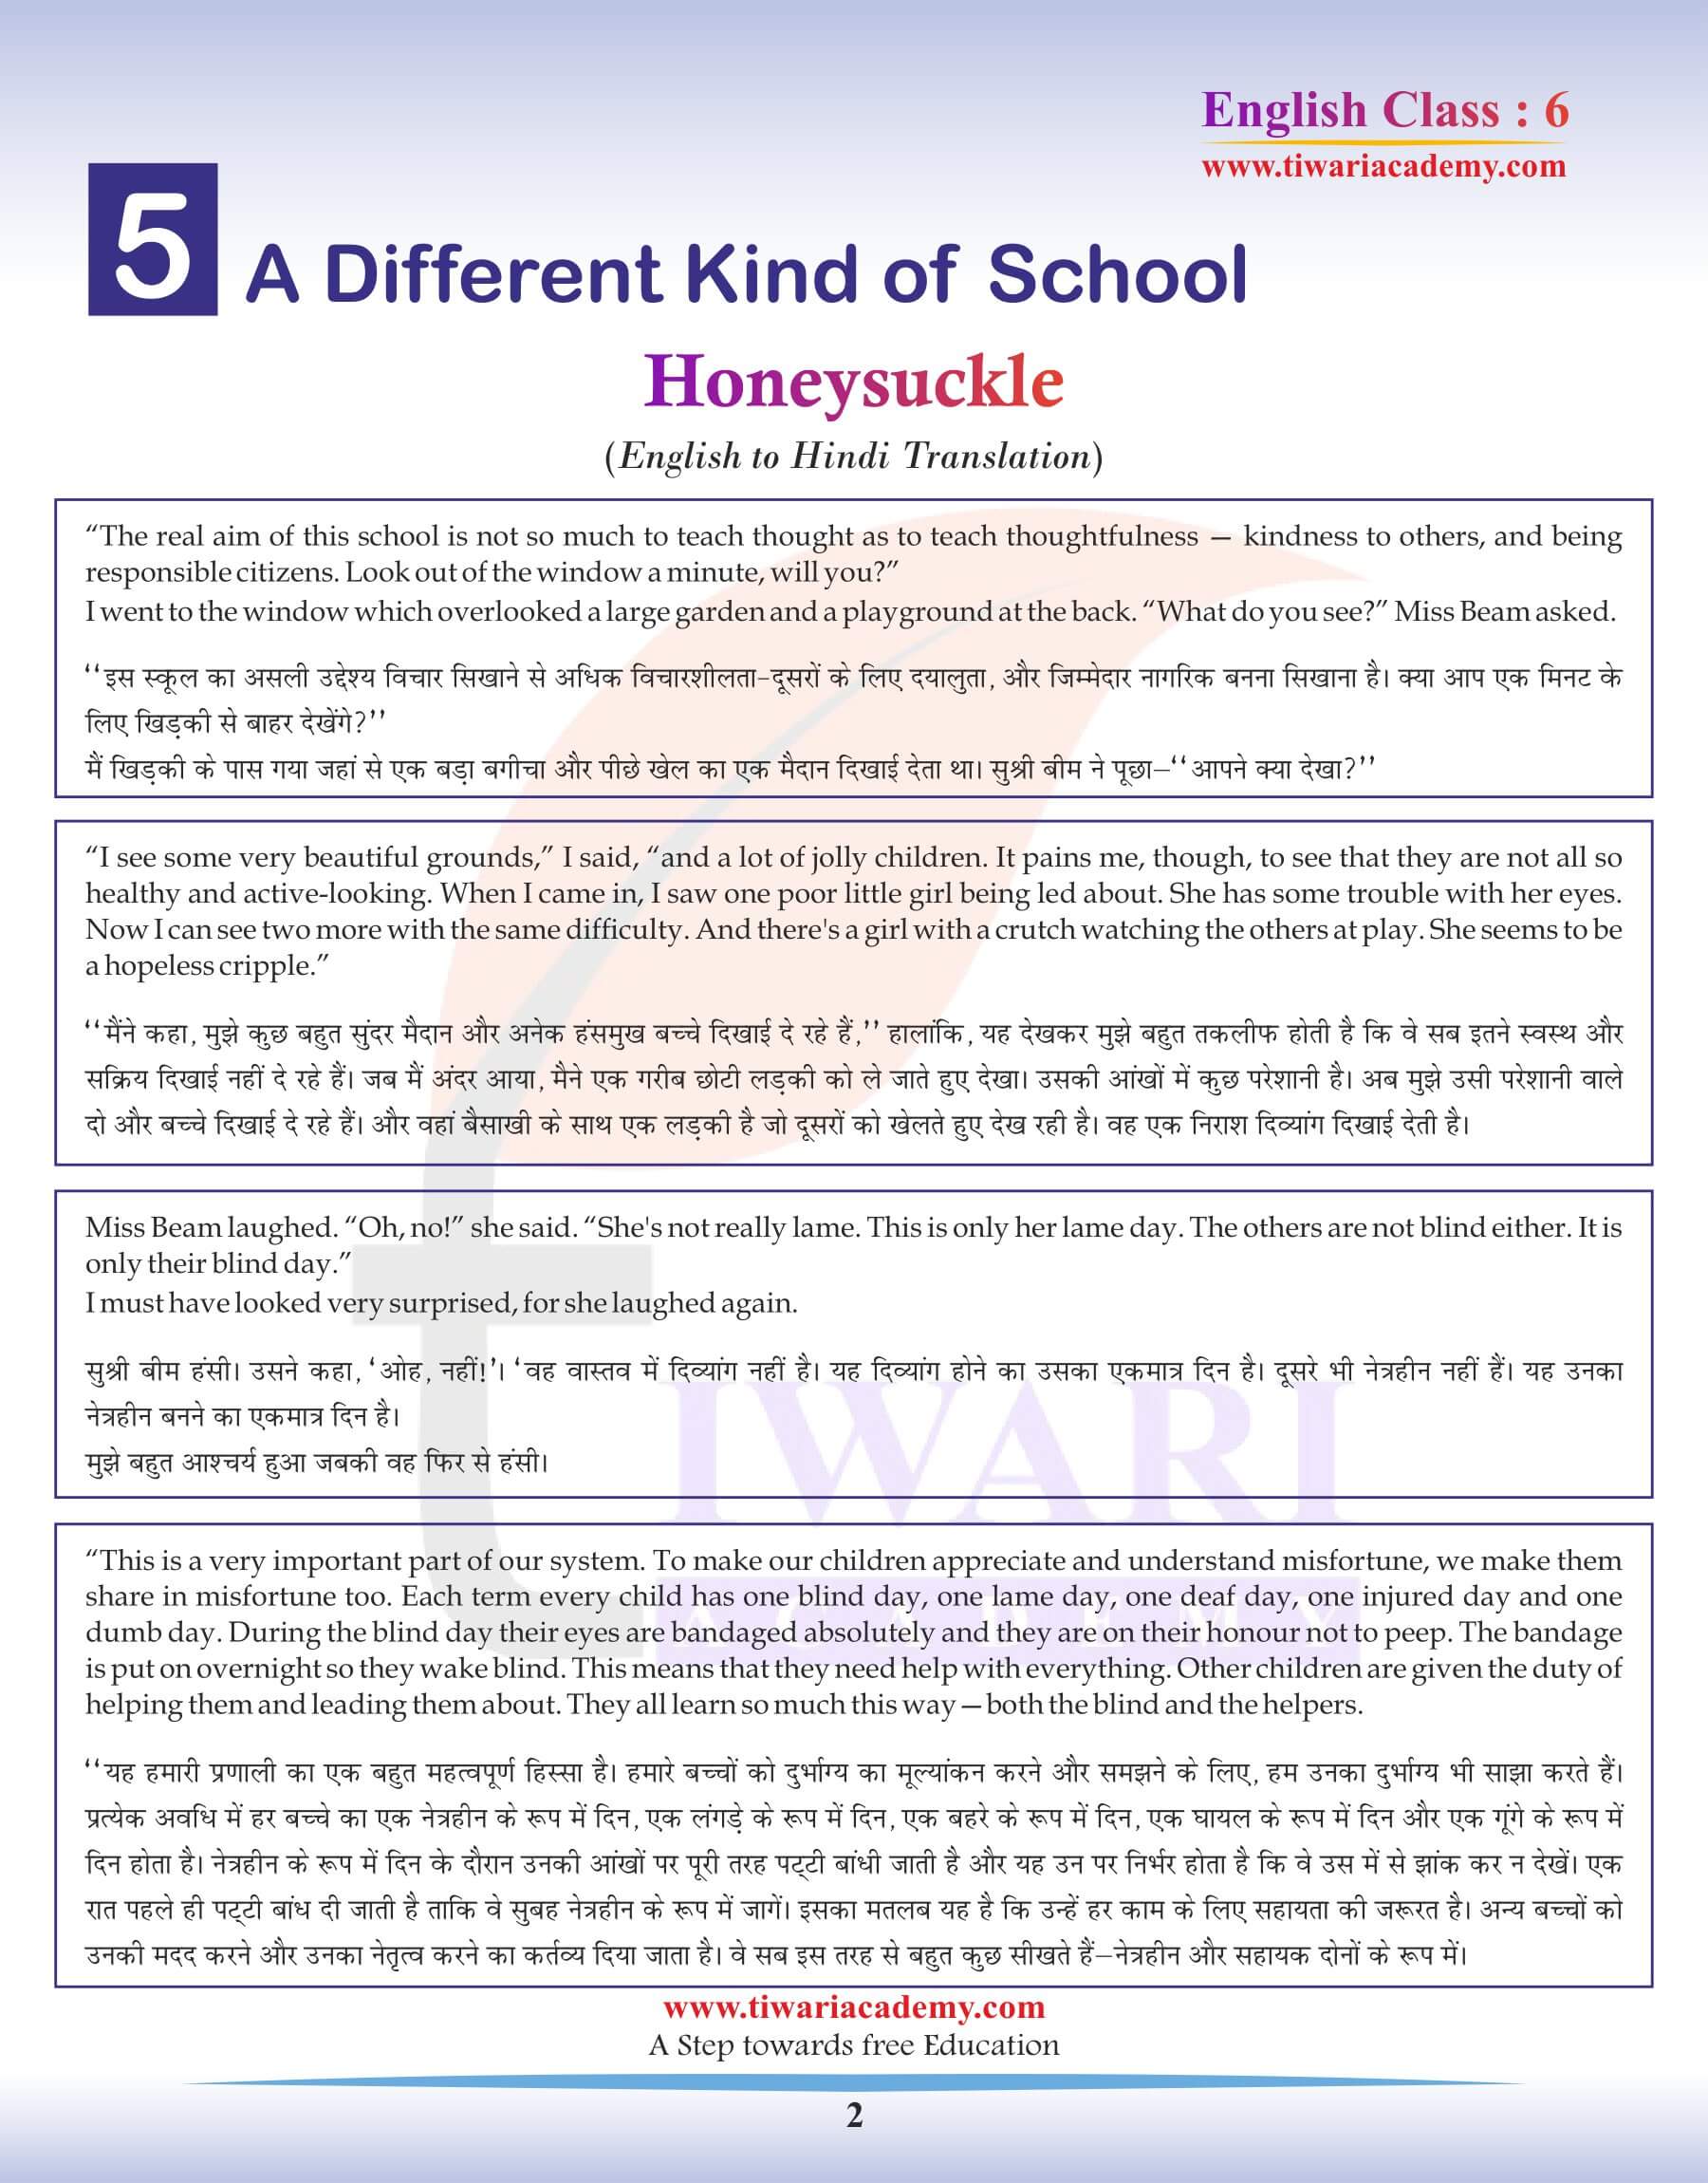 Class 6 English Chapter 5 Hindi Translation revised and updated